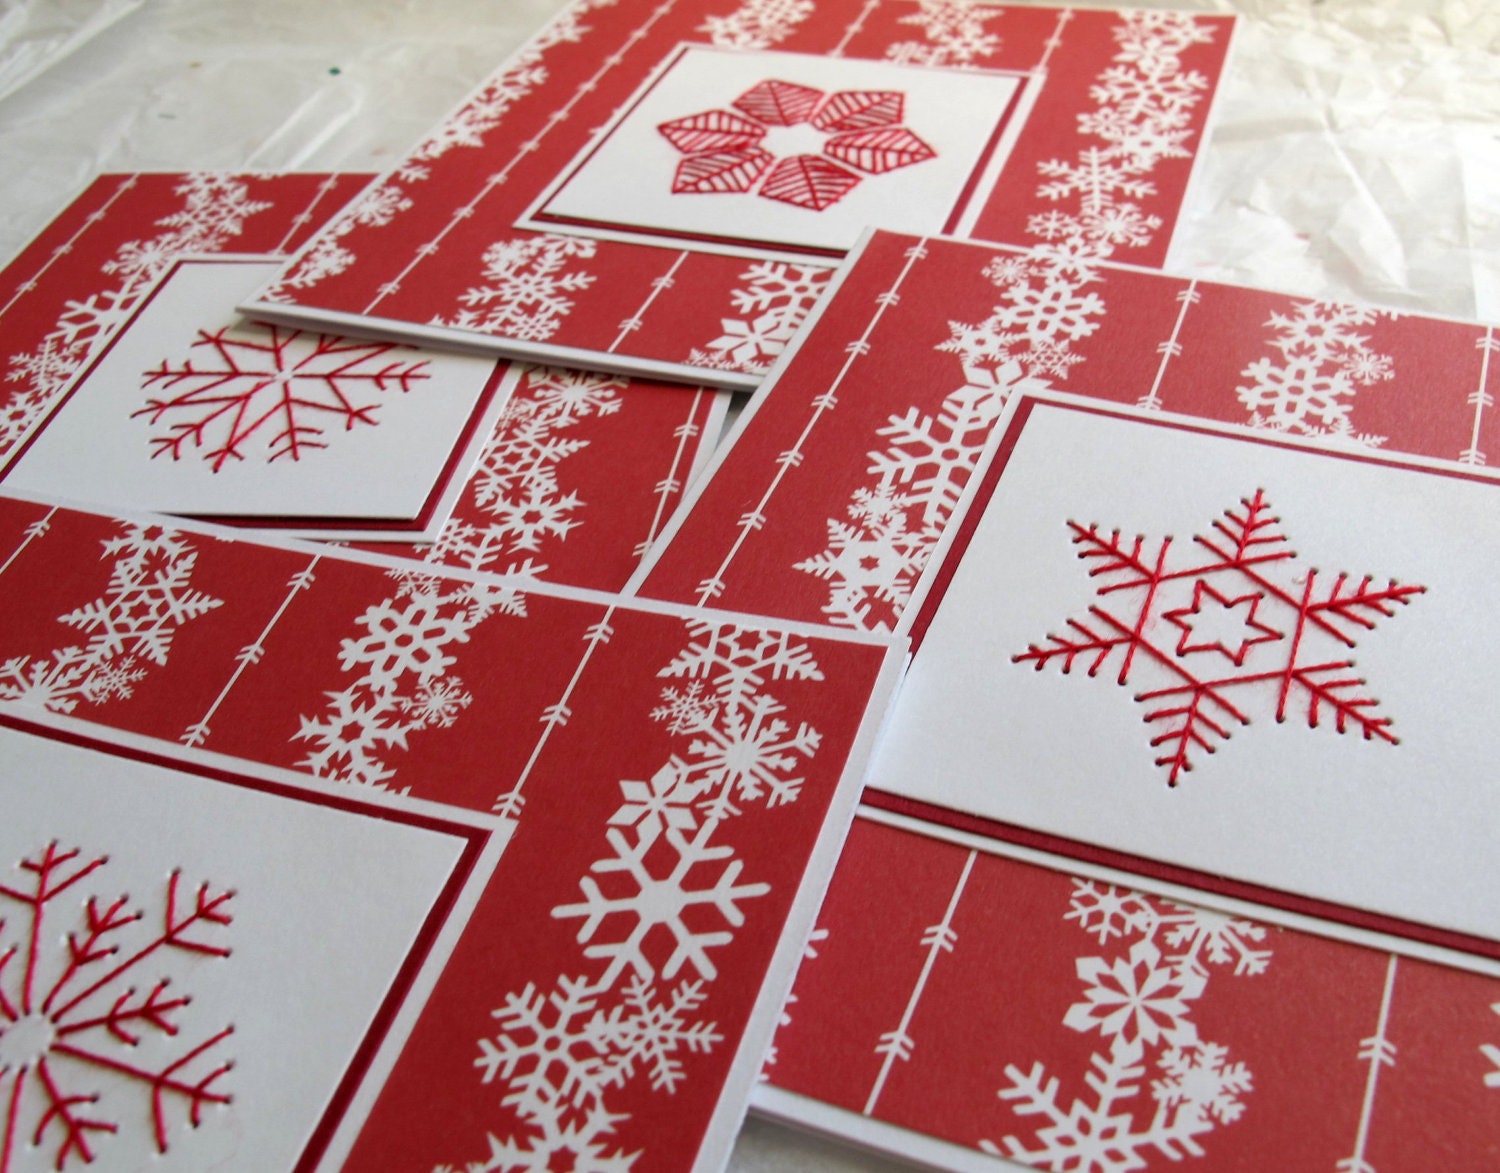 Red and White Embroidered Snowflake Card - SandrasCardShop